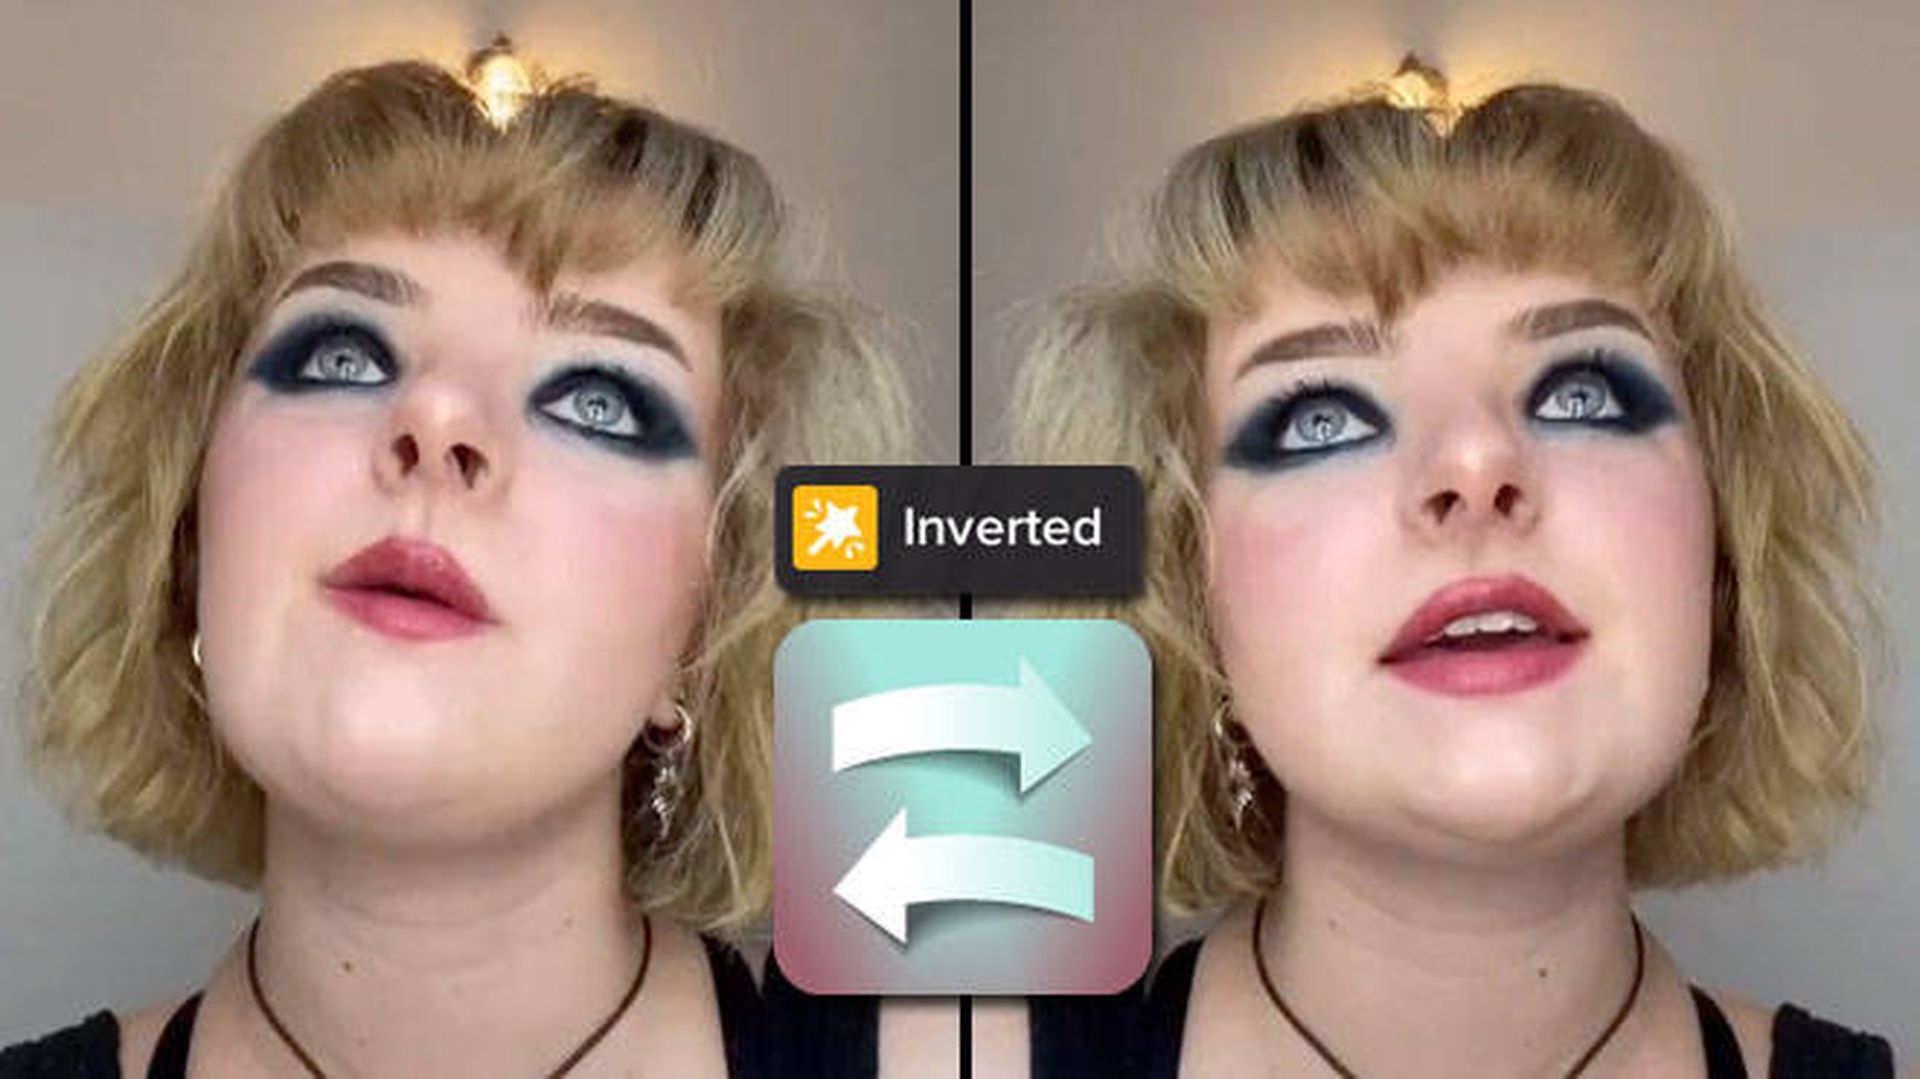 TikTok now has a very interesting filter that mirrors your face, and many are asking: "Is the inverted filter on TikTok how others see you?"